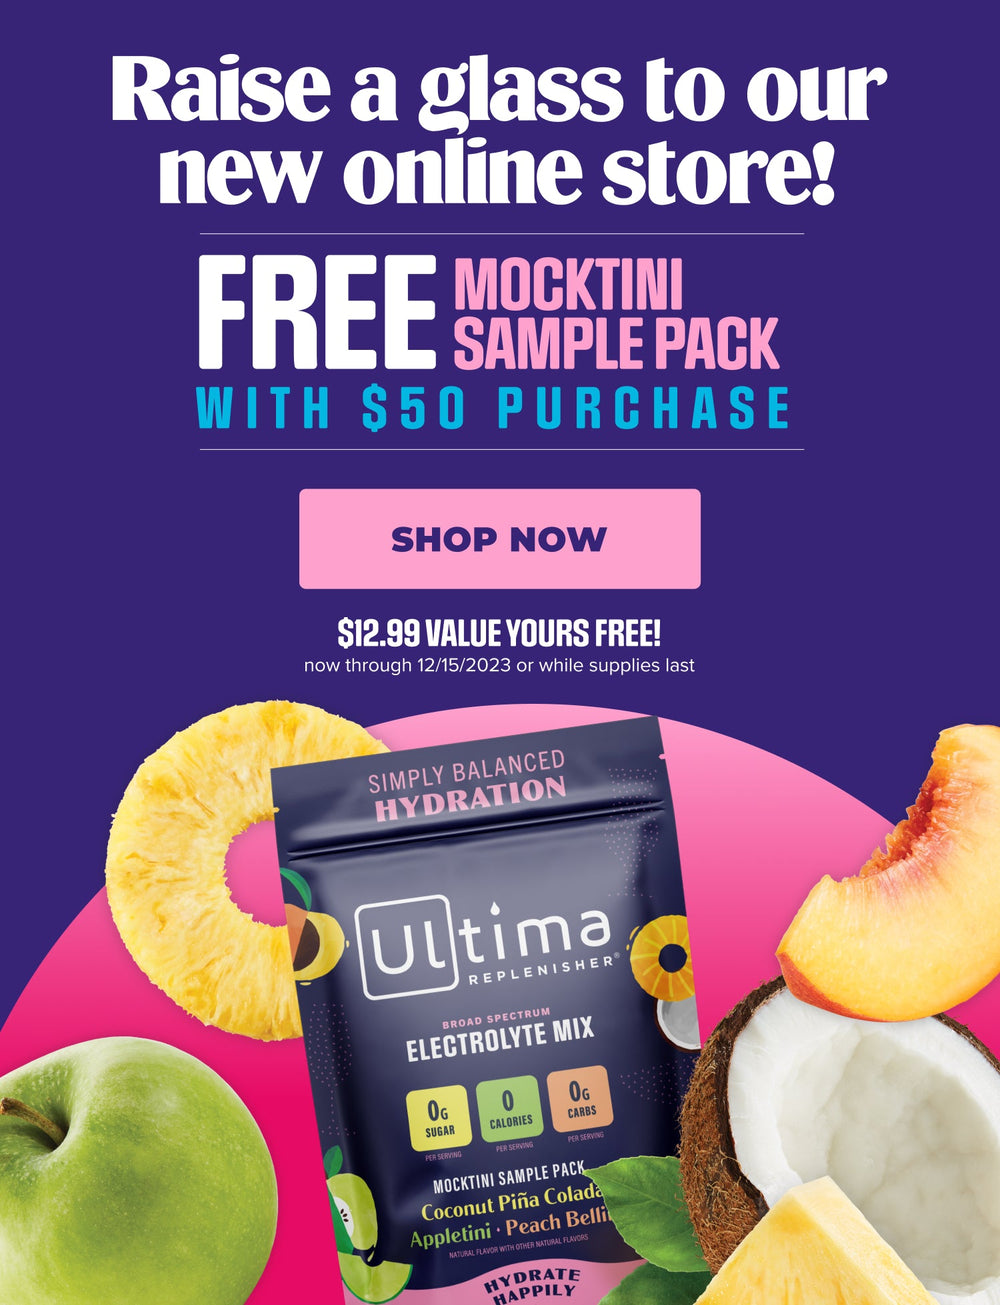 Free Mocktini sample back with $50 purchase! Limit one per customer.